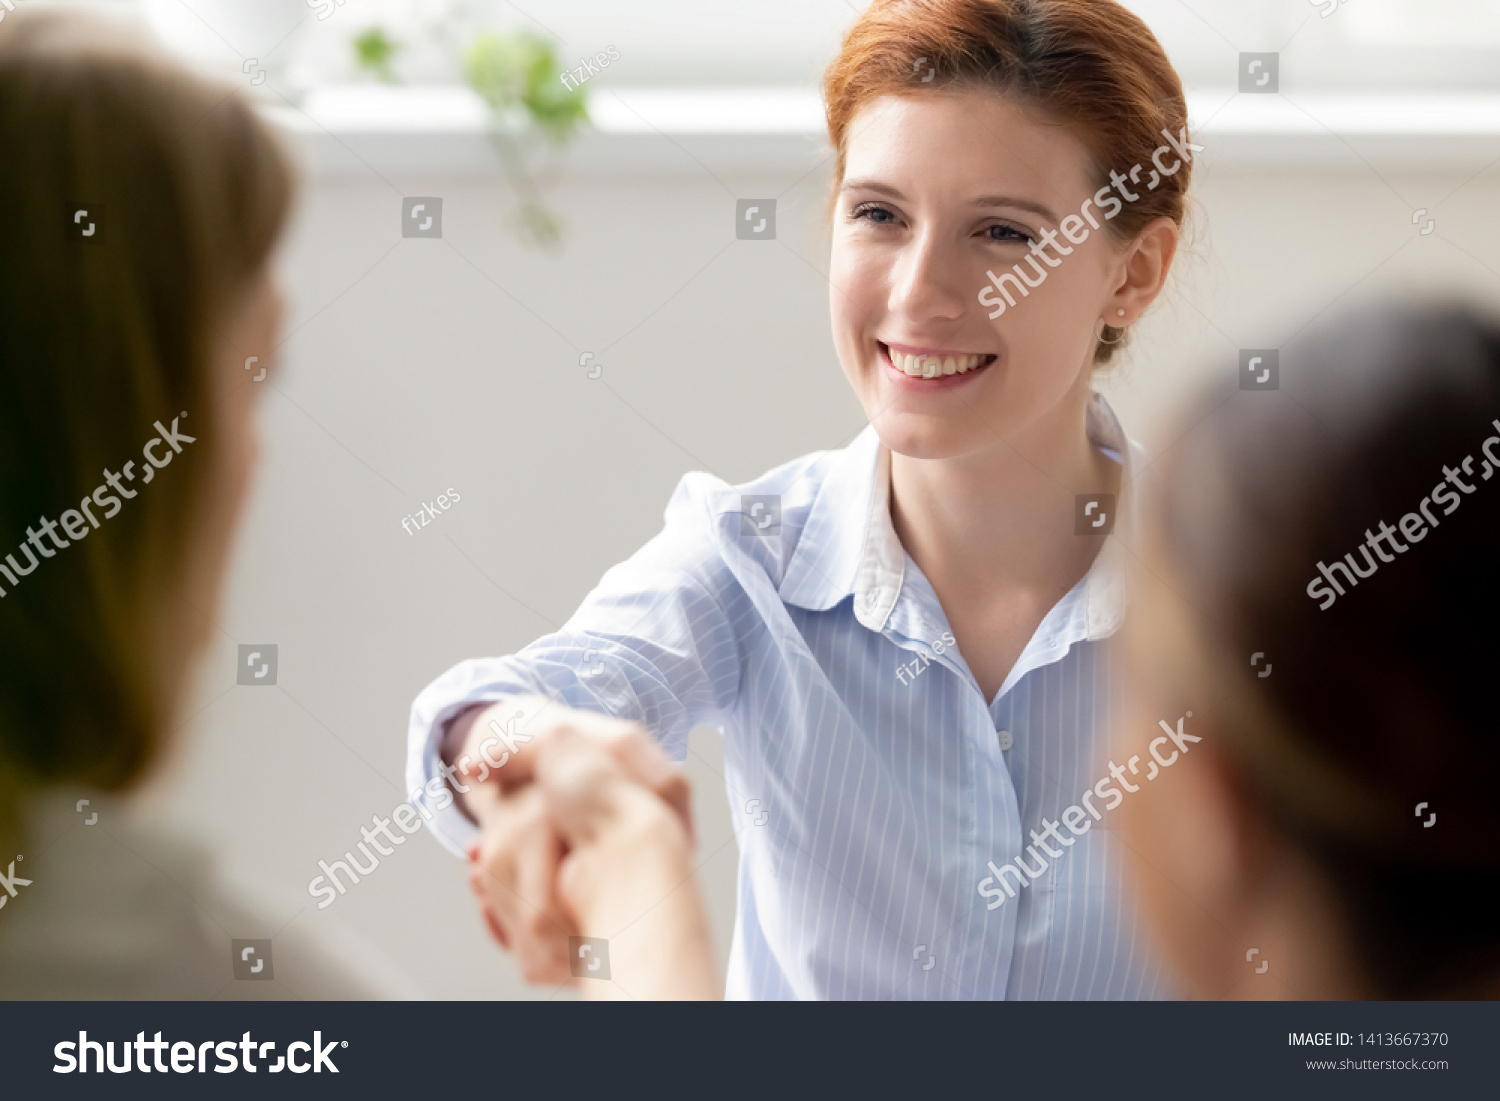 Smiling businesswoman greeting shaking hand female client, new colleague, vacancy candidate at meeting in office. Hiring sale bank investment deal start of negotiations job seeker applicant interview #1413667370